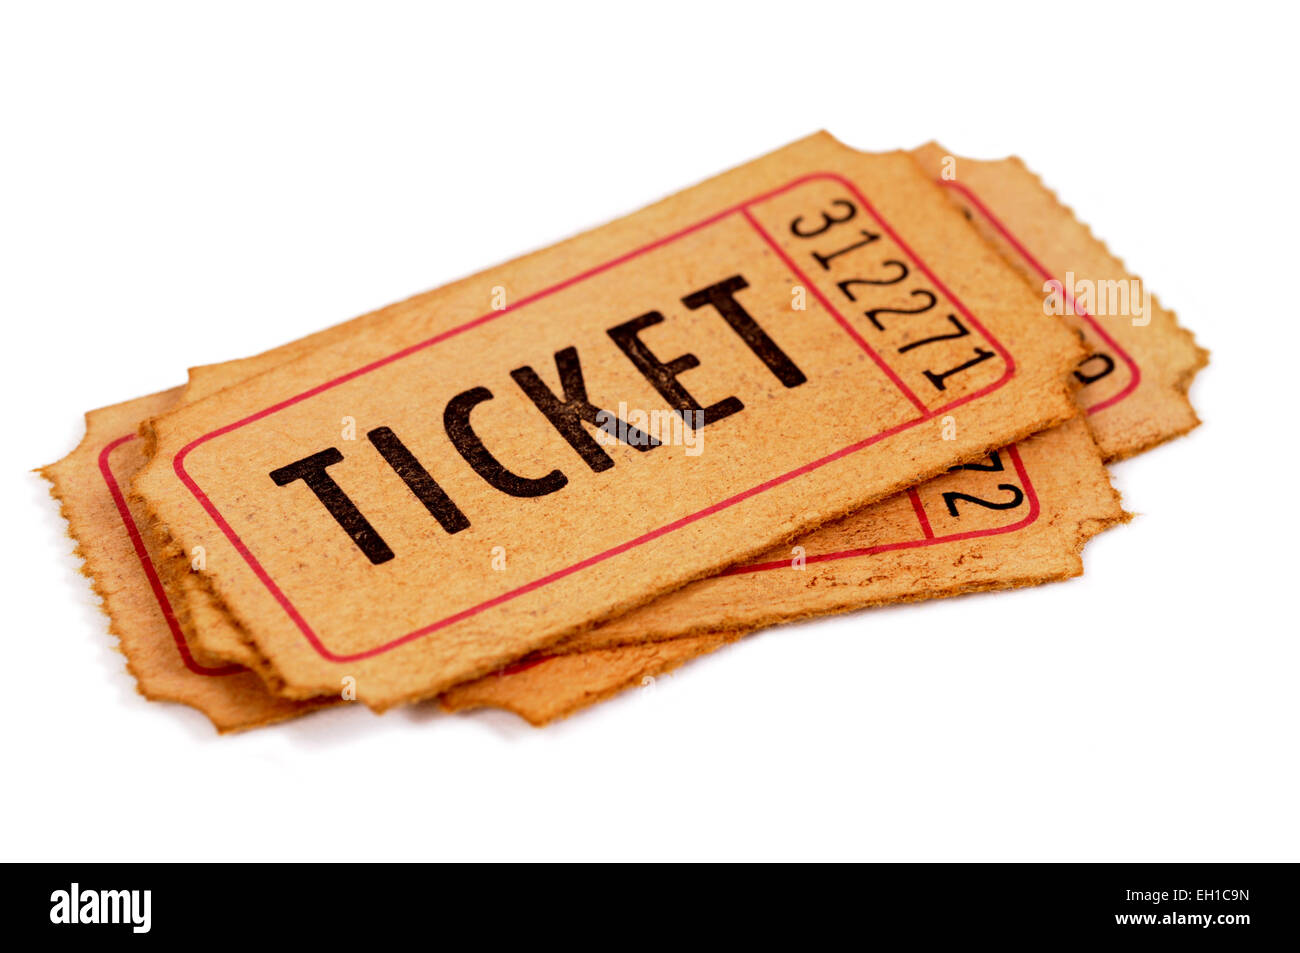 Small pile of old admission tickets isolated on a white background. Stock Photo